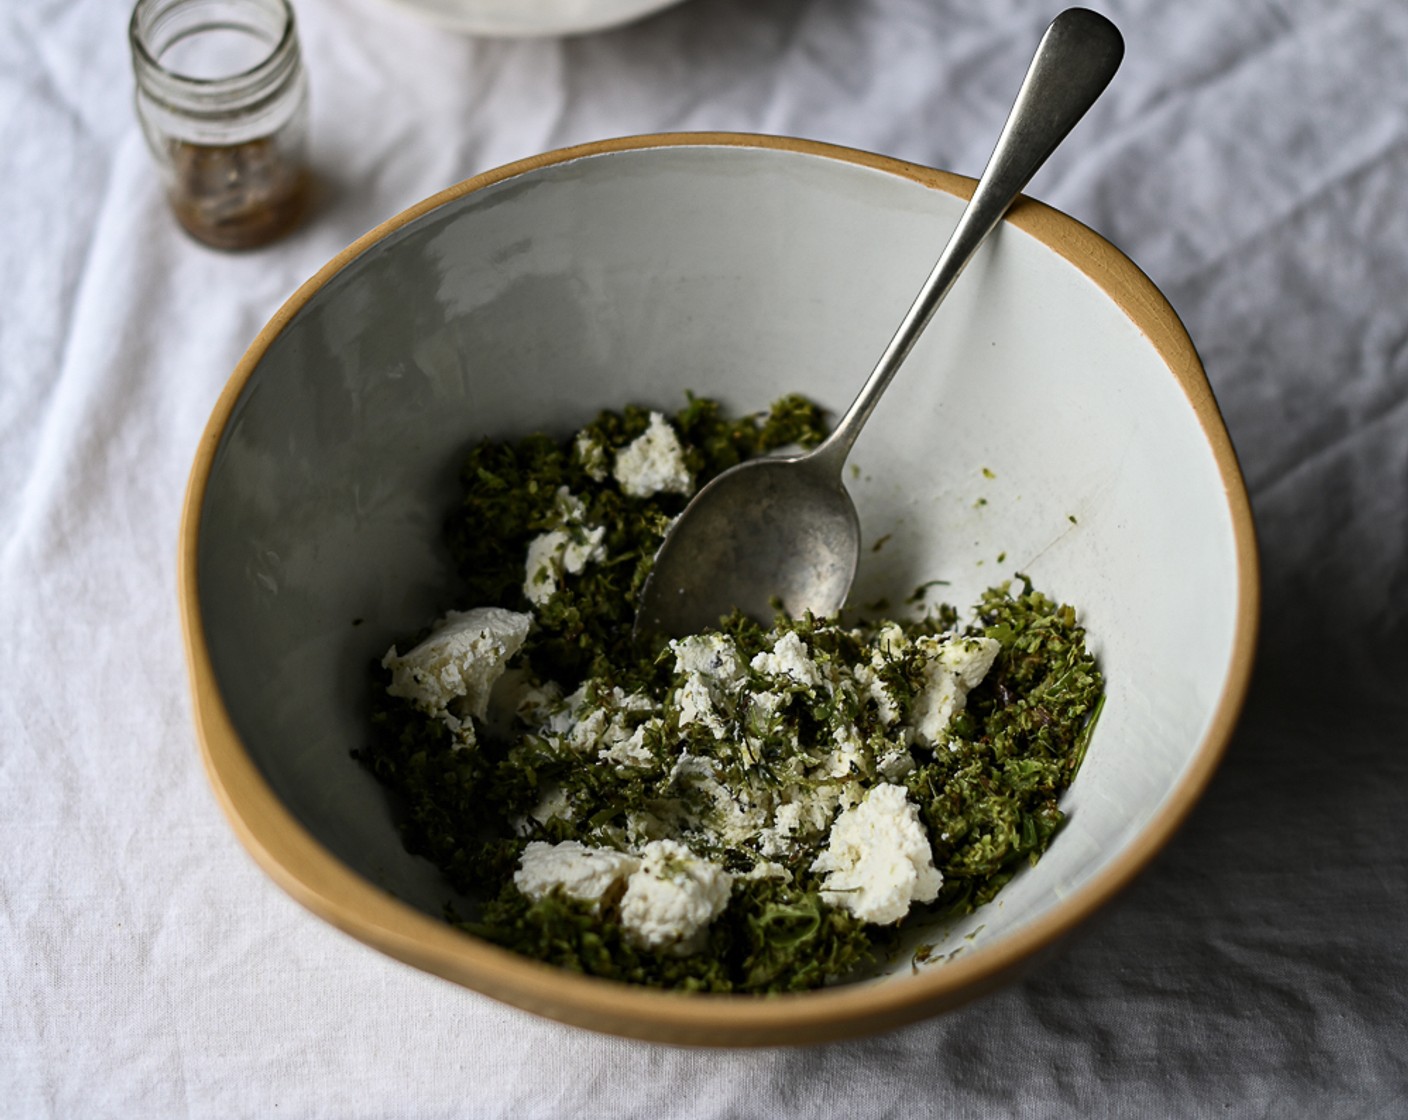 step 4 Leave the broccoli to cool before roughly chopping and combining with the Ricotta Cheese (1 cup), 10 ml of Lemon (1), and Ground Nutmeg (1/2 Tbsp). Refrigerate until needed.